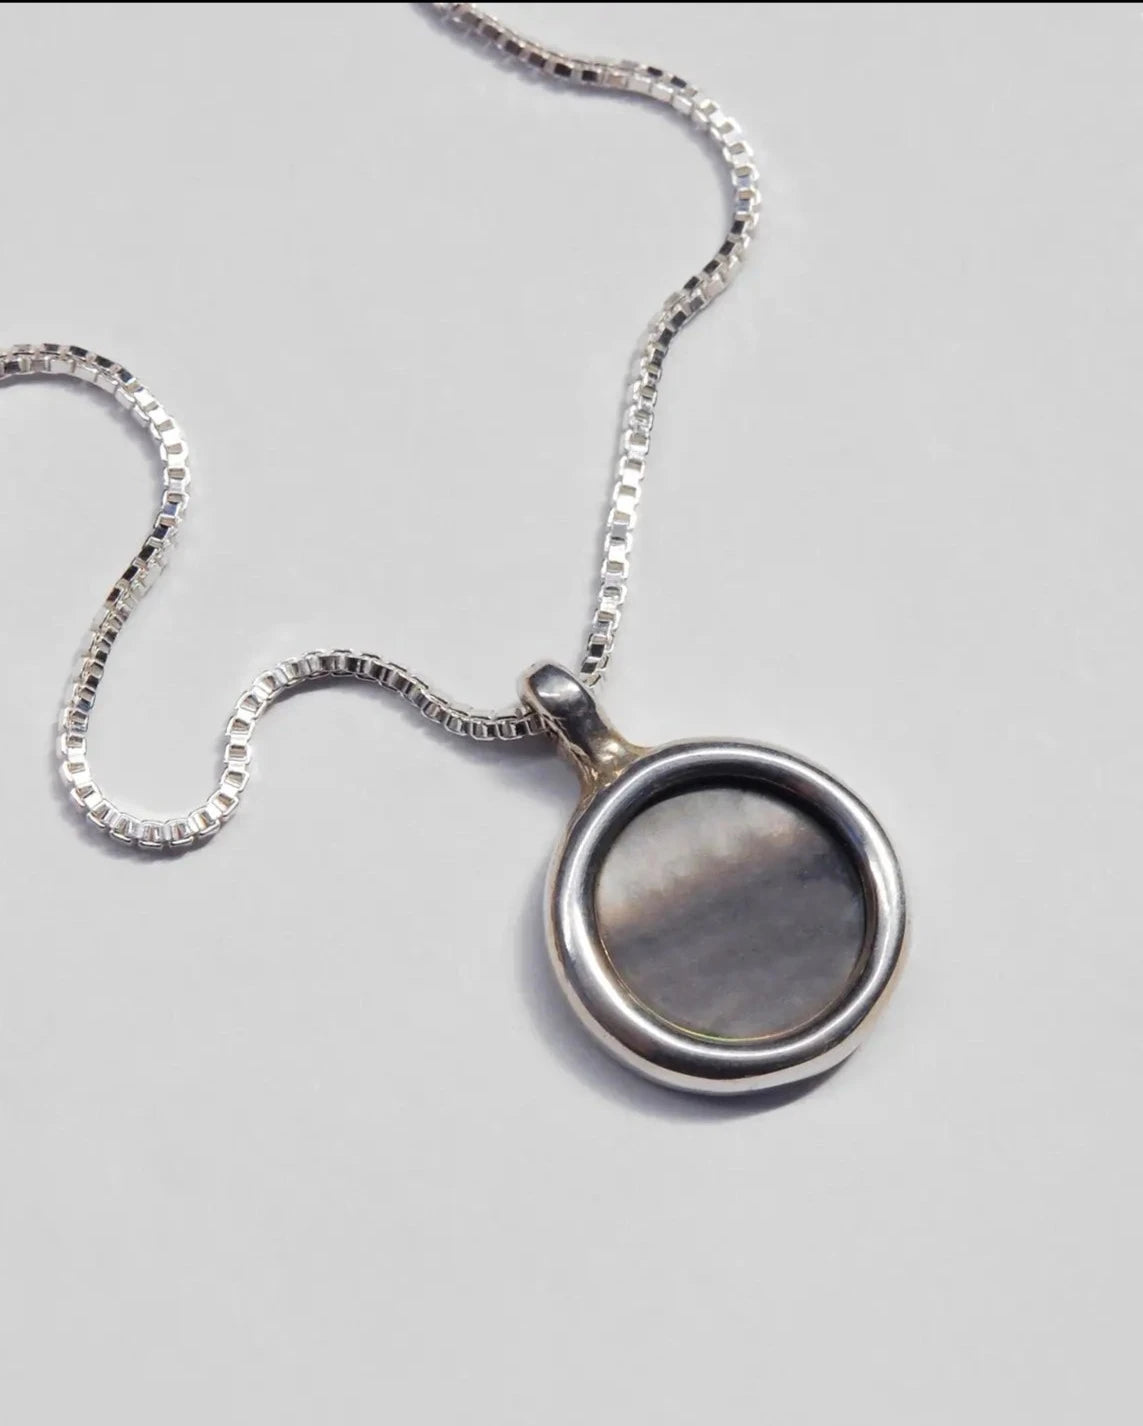 mare necklace - grey mother of pearl